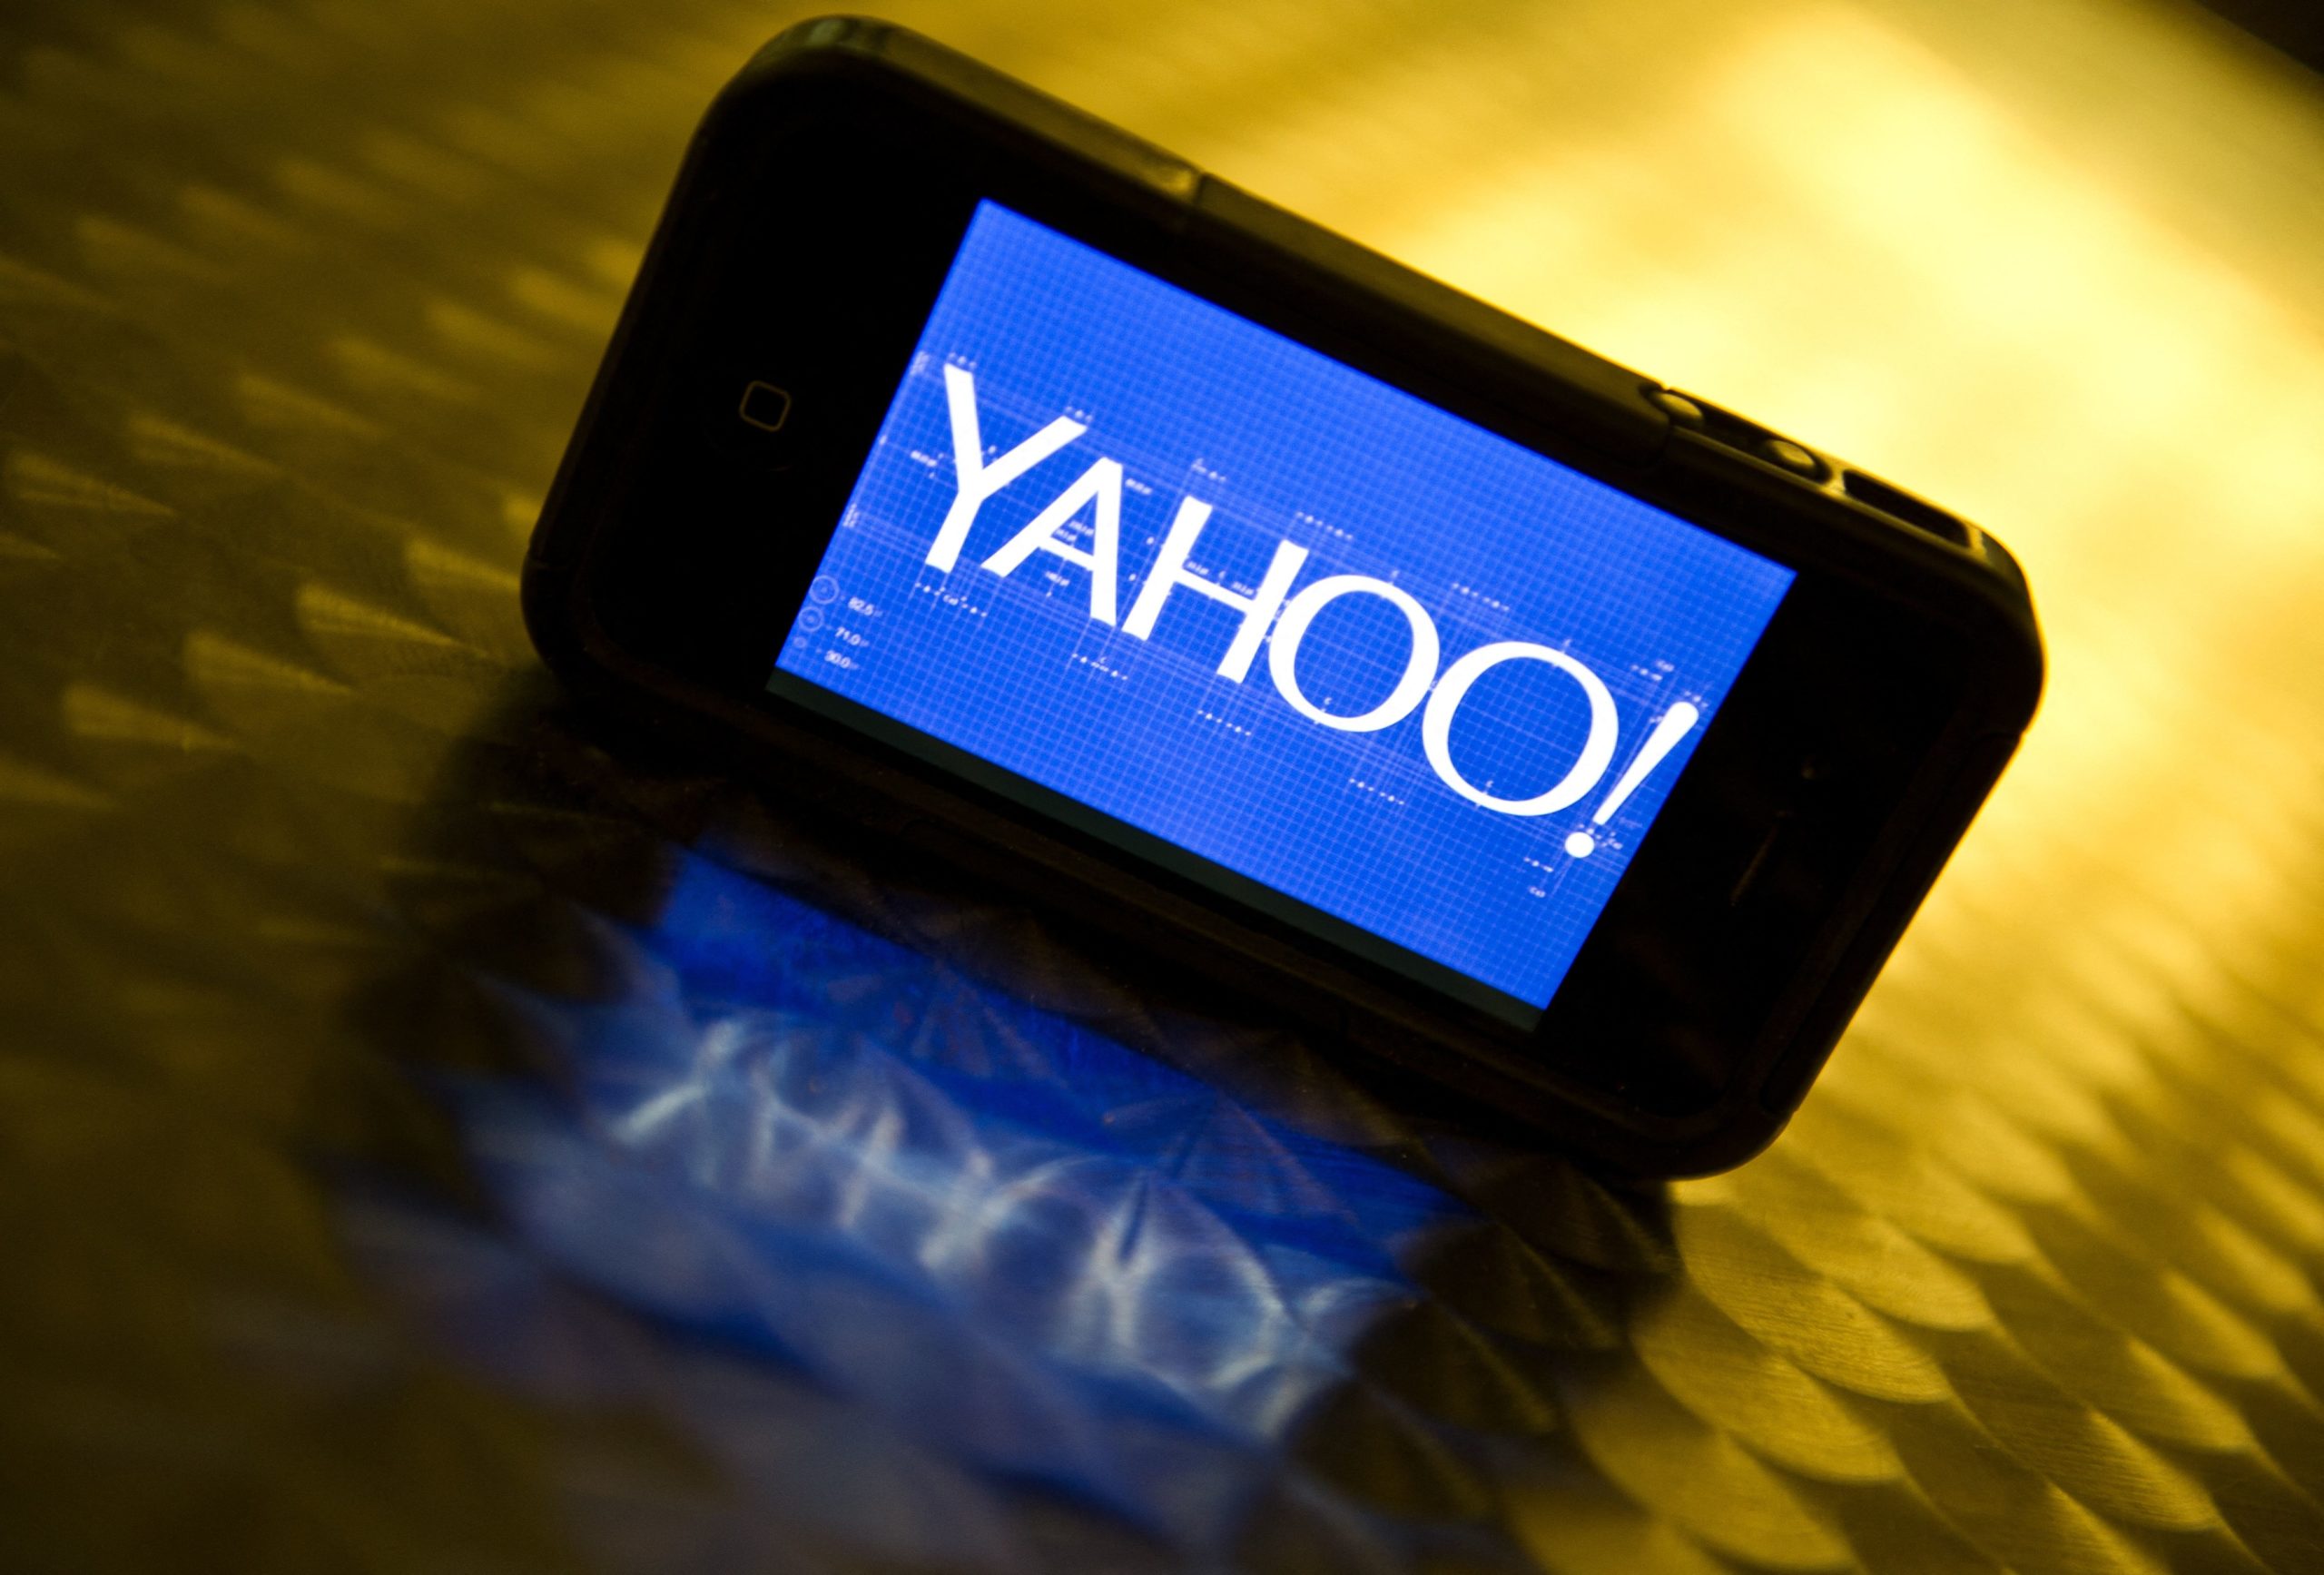 This September 12, 2013 photo illustration shows the newly designed Yahoo logo seen on a smartphone. Yahoo has refreshed its logo for the first time since the Internet companys founding 18 years ago. The new look unveiled September 4 is part of a makeover that Yahoo Inc. has been undergoing since the Sunnyvale, California company hired Google executive Marissa Mayer to become Yahoos CEO. 